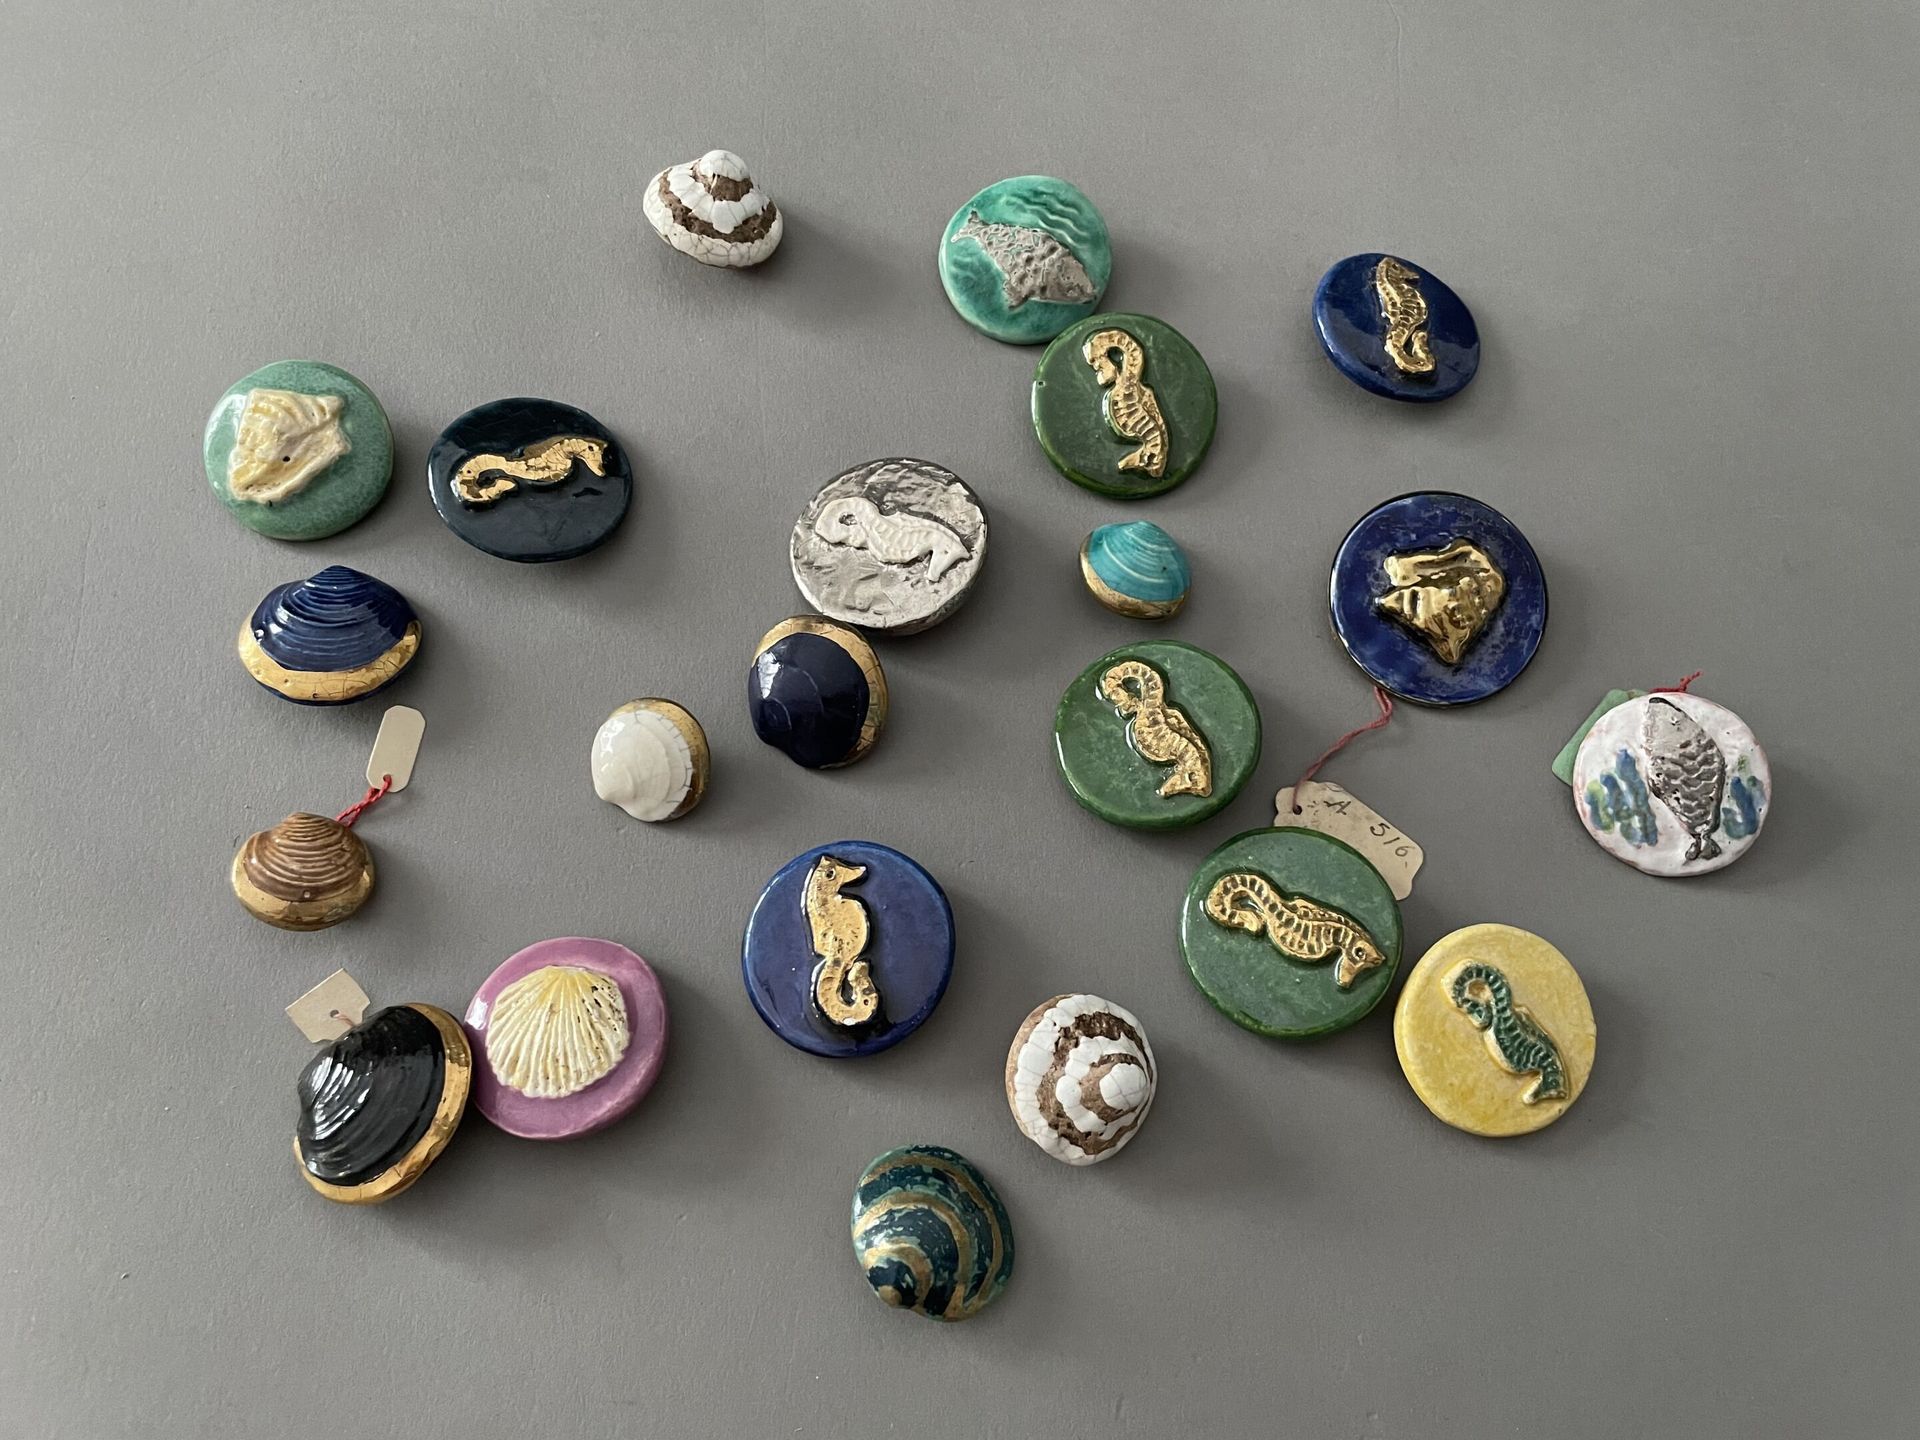 Null Meeting of twenty-two ceramic buttons for high fashion on the theme of the &hellip;